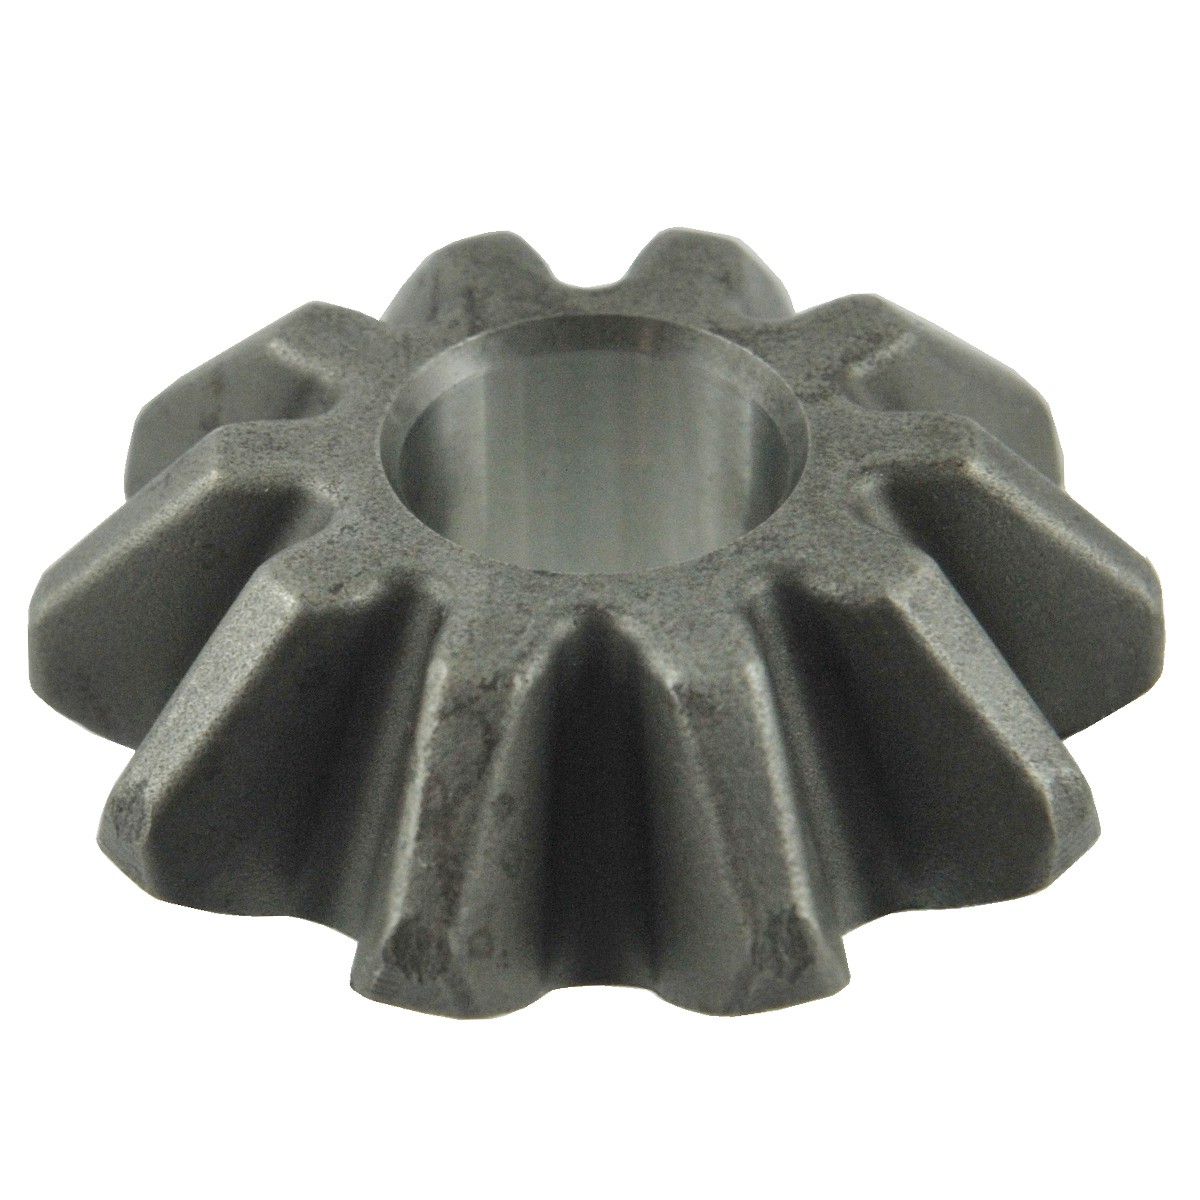 Sprocket 10T / 56.70 x 20.50 x 19 mm / LS MT1.25 / LS MT3.35 / LS MT3.40 / LS MT3.50 / LS MT3.60 / TRG310 / 40182444